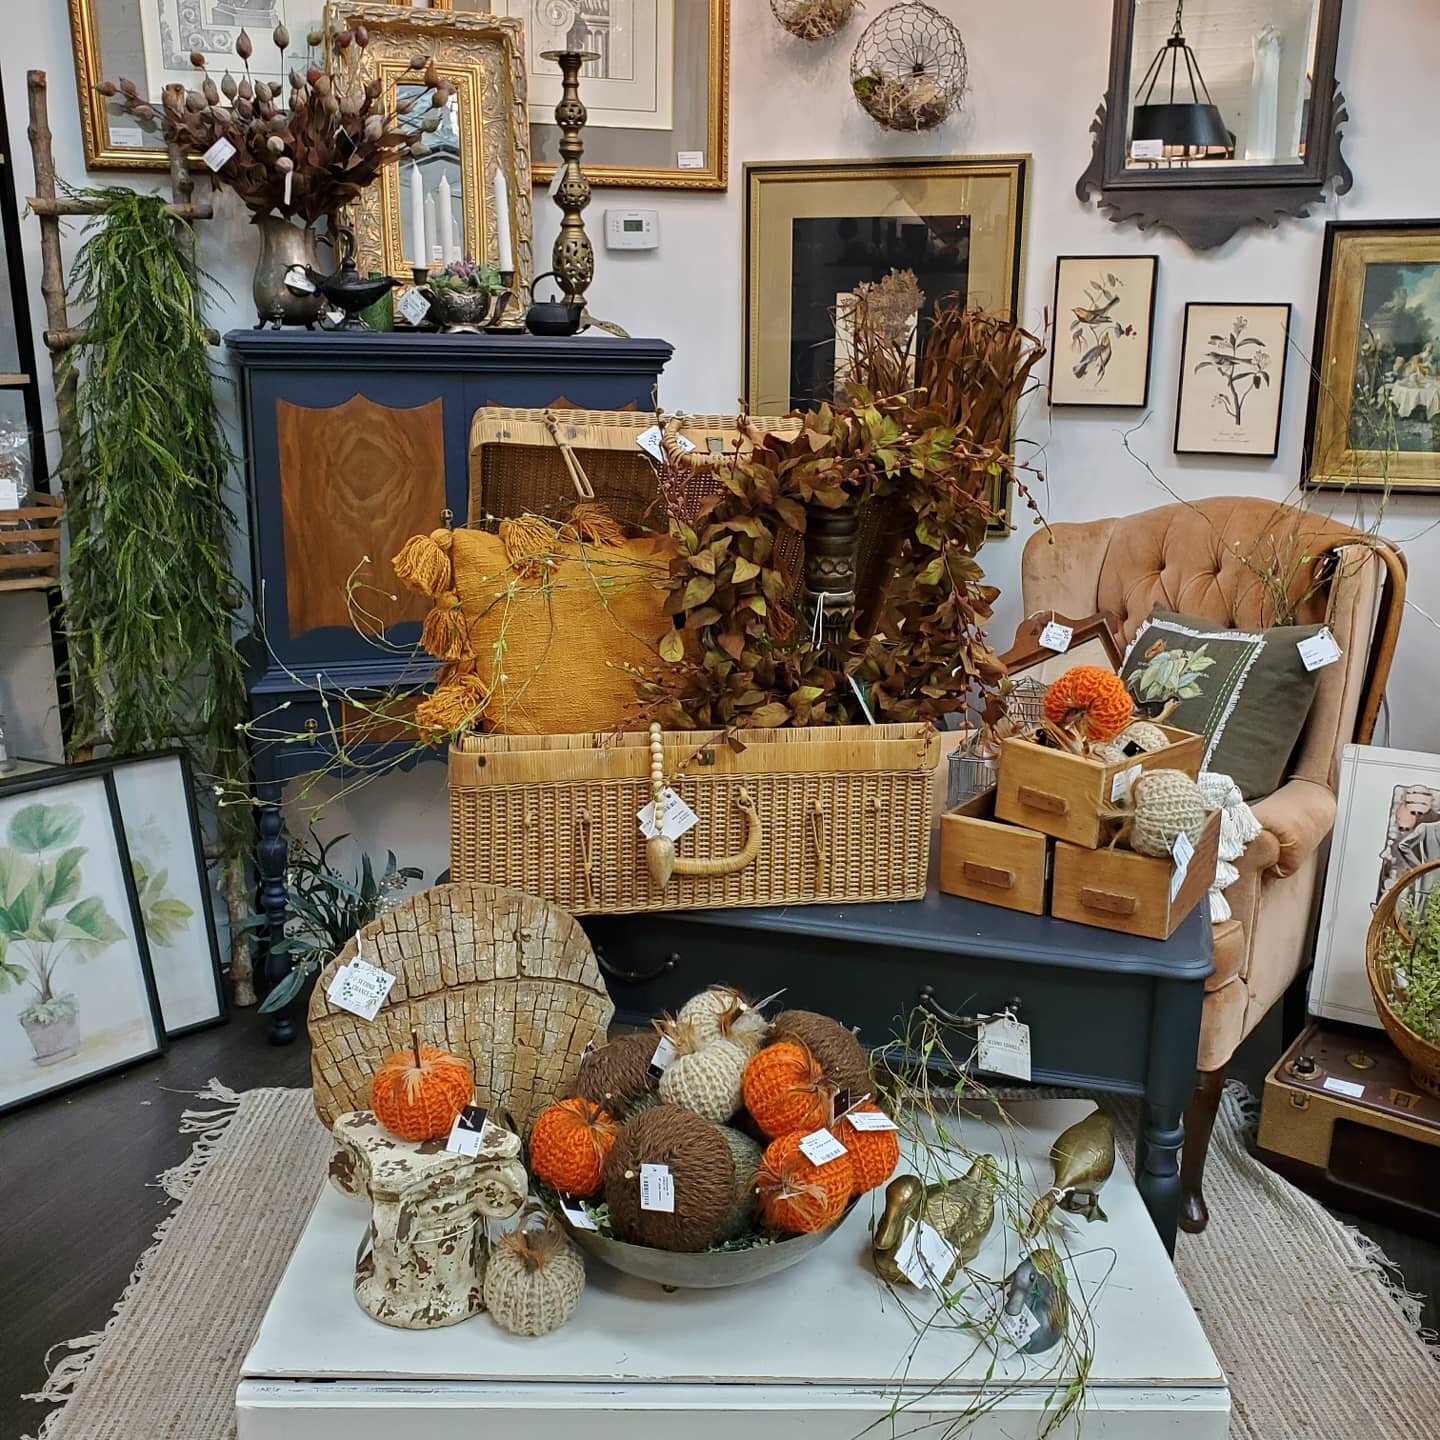 Booth Refresh at Warehouse 55! Who's feeling fall? Maybe not this week, but its coming! Loving the Navy and Rust colors for a fresh twist!